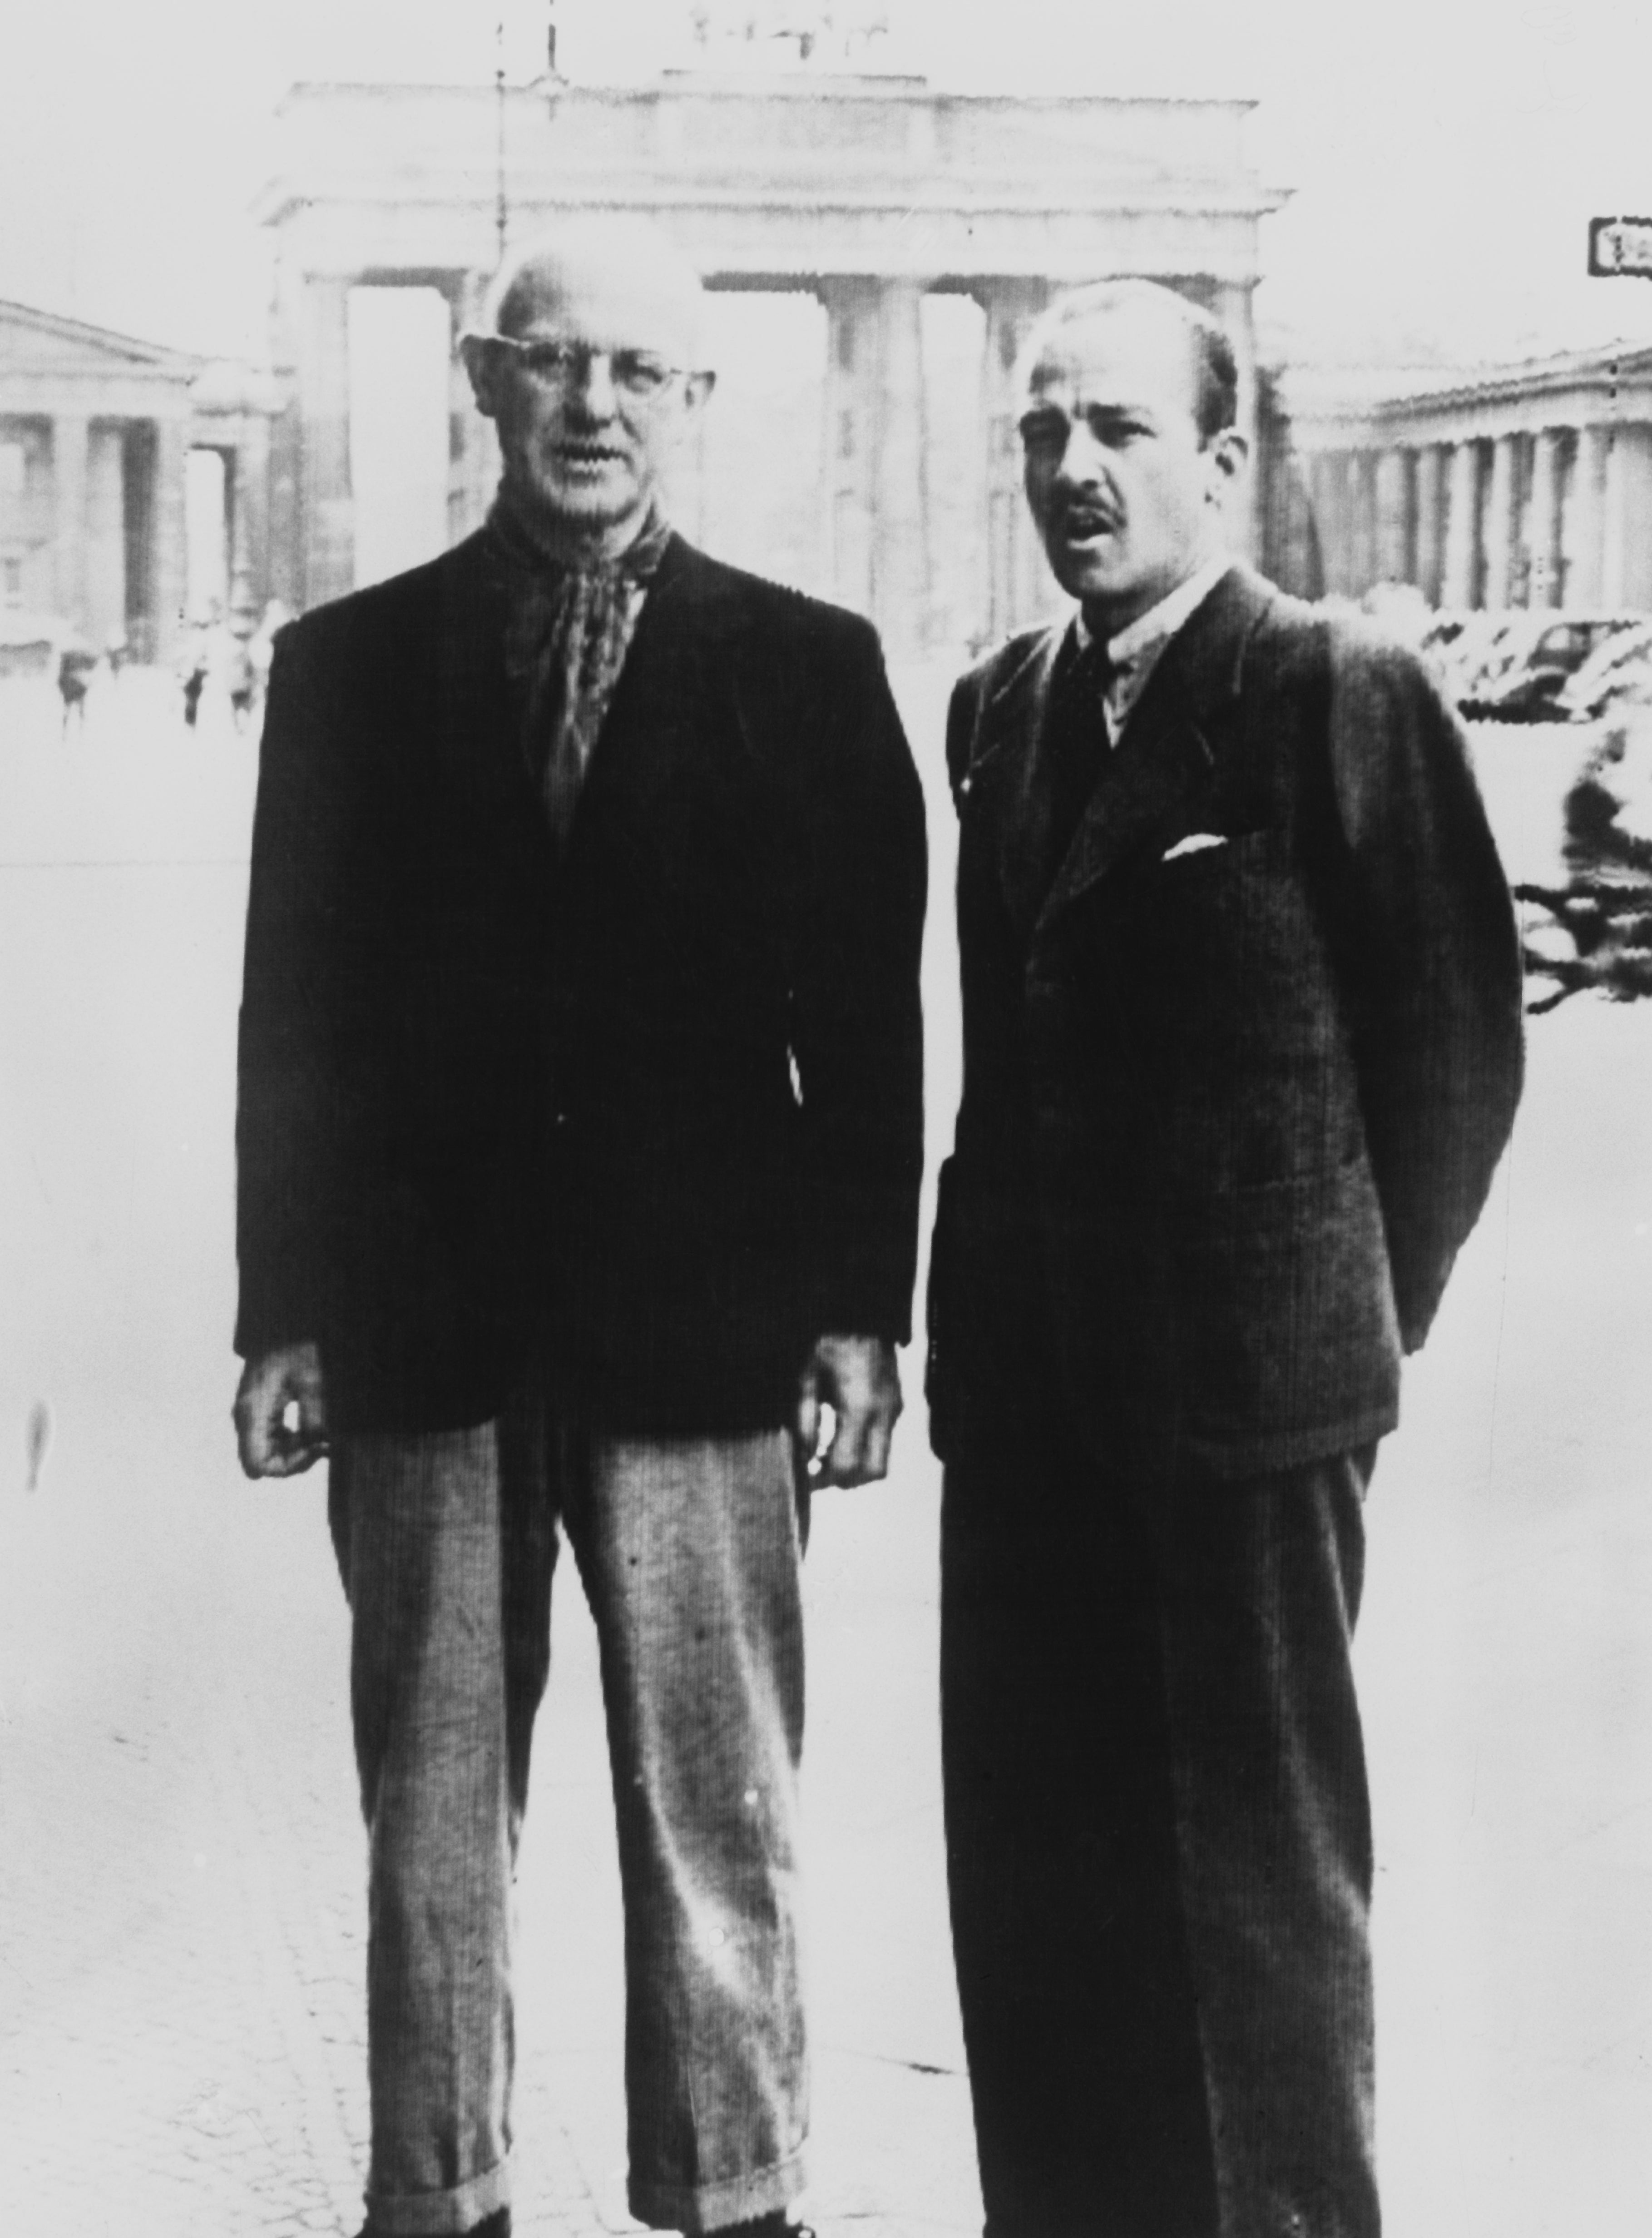 Wodehouse (left) with Hugo Speck in front of the Brandenburg Gate in Berlin, 1941